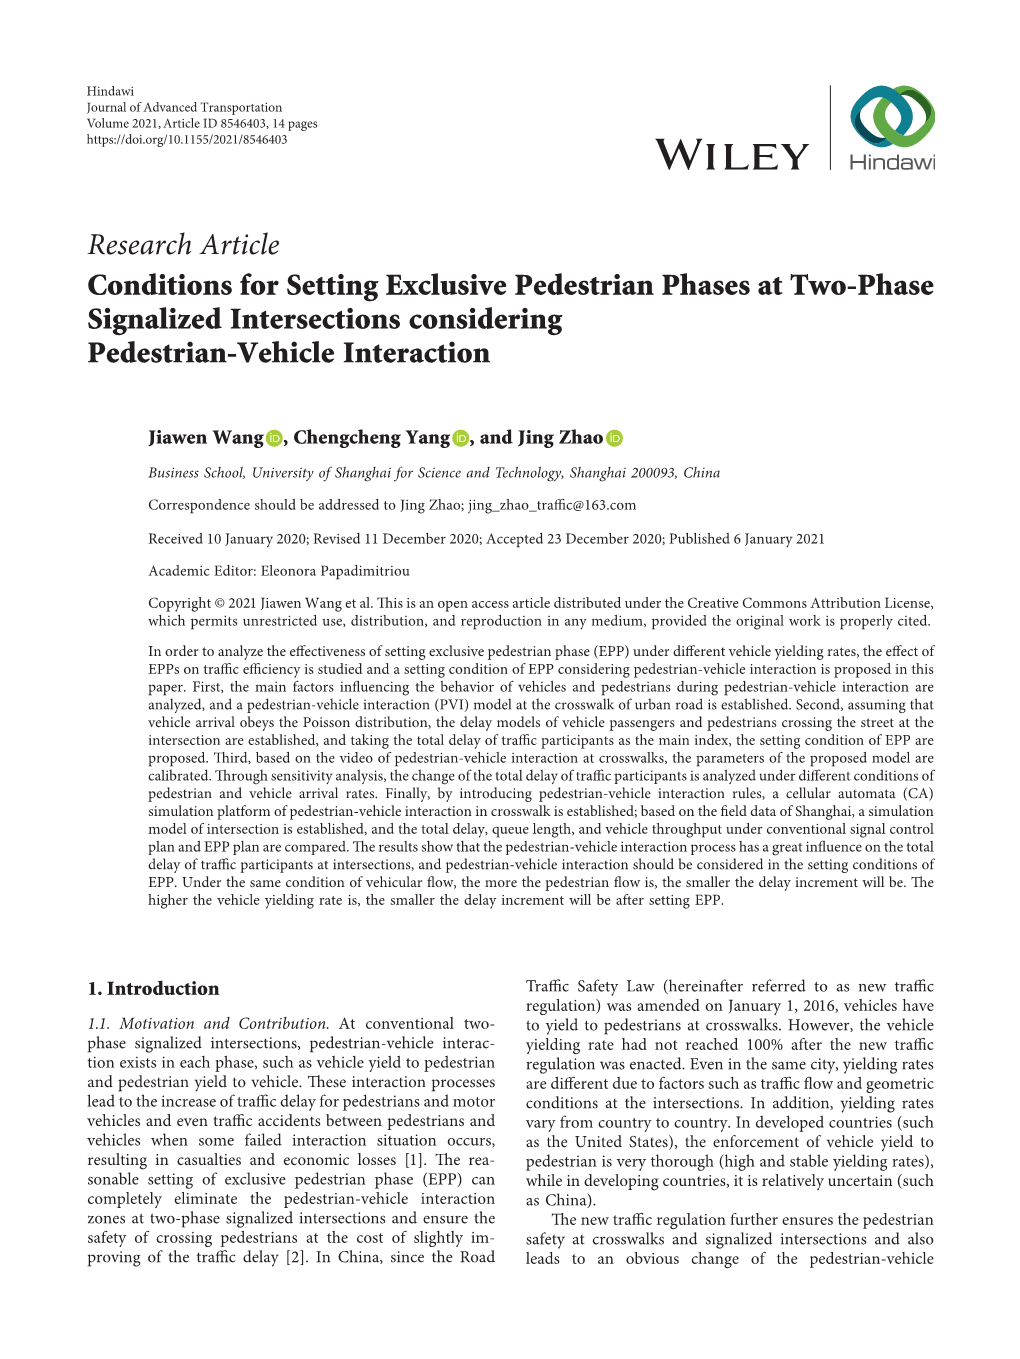 Conditions for Setting Exclusive Pedestrian Phases at Two-Phase Signalized Intersections Considering Pedestrian-Vehicle Interaction